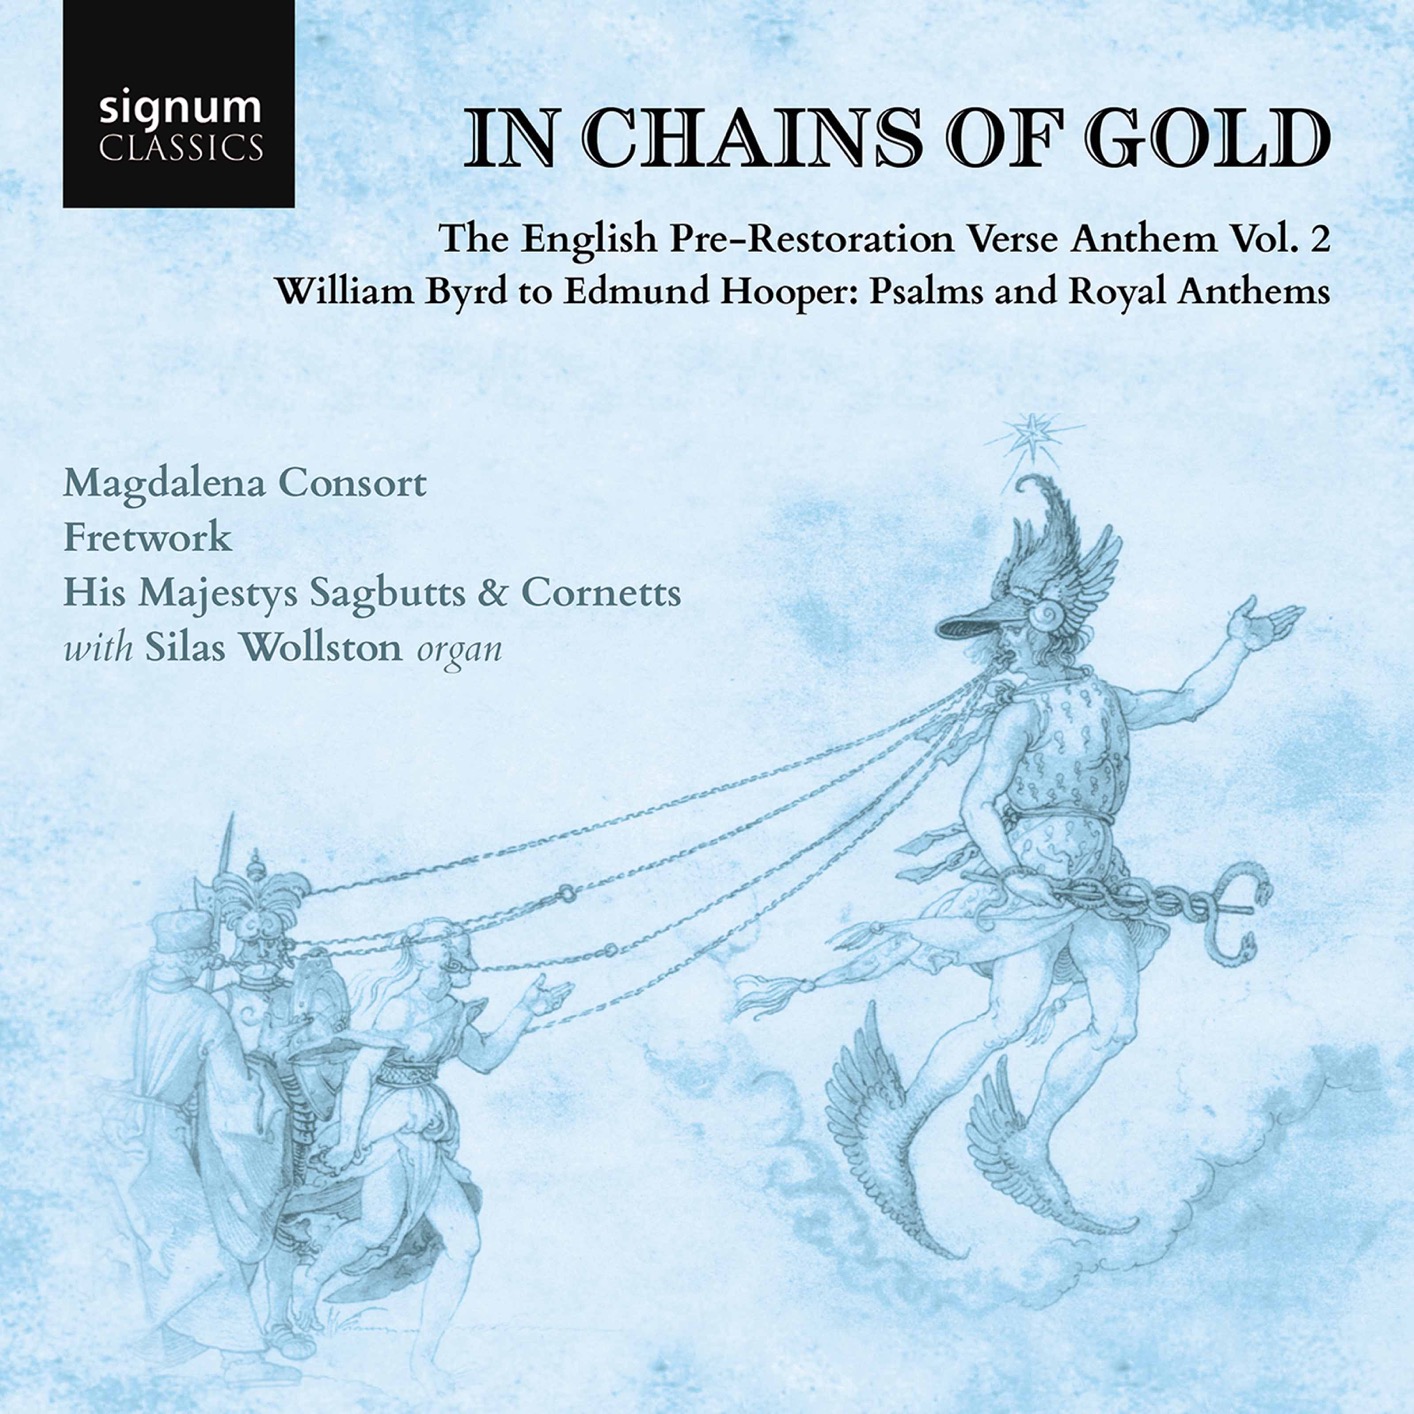 Magdalena Consort – In Chains of Gold,The English Pre-Restoration Verse Anthem Vol. 2 (2020) [FLAC 24bit/192kHz]